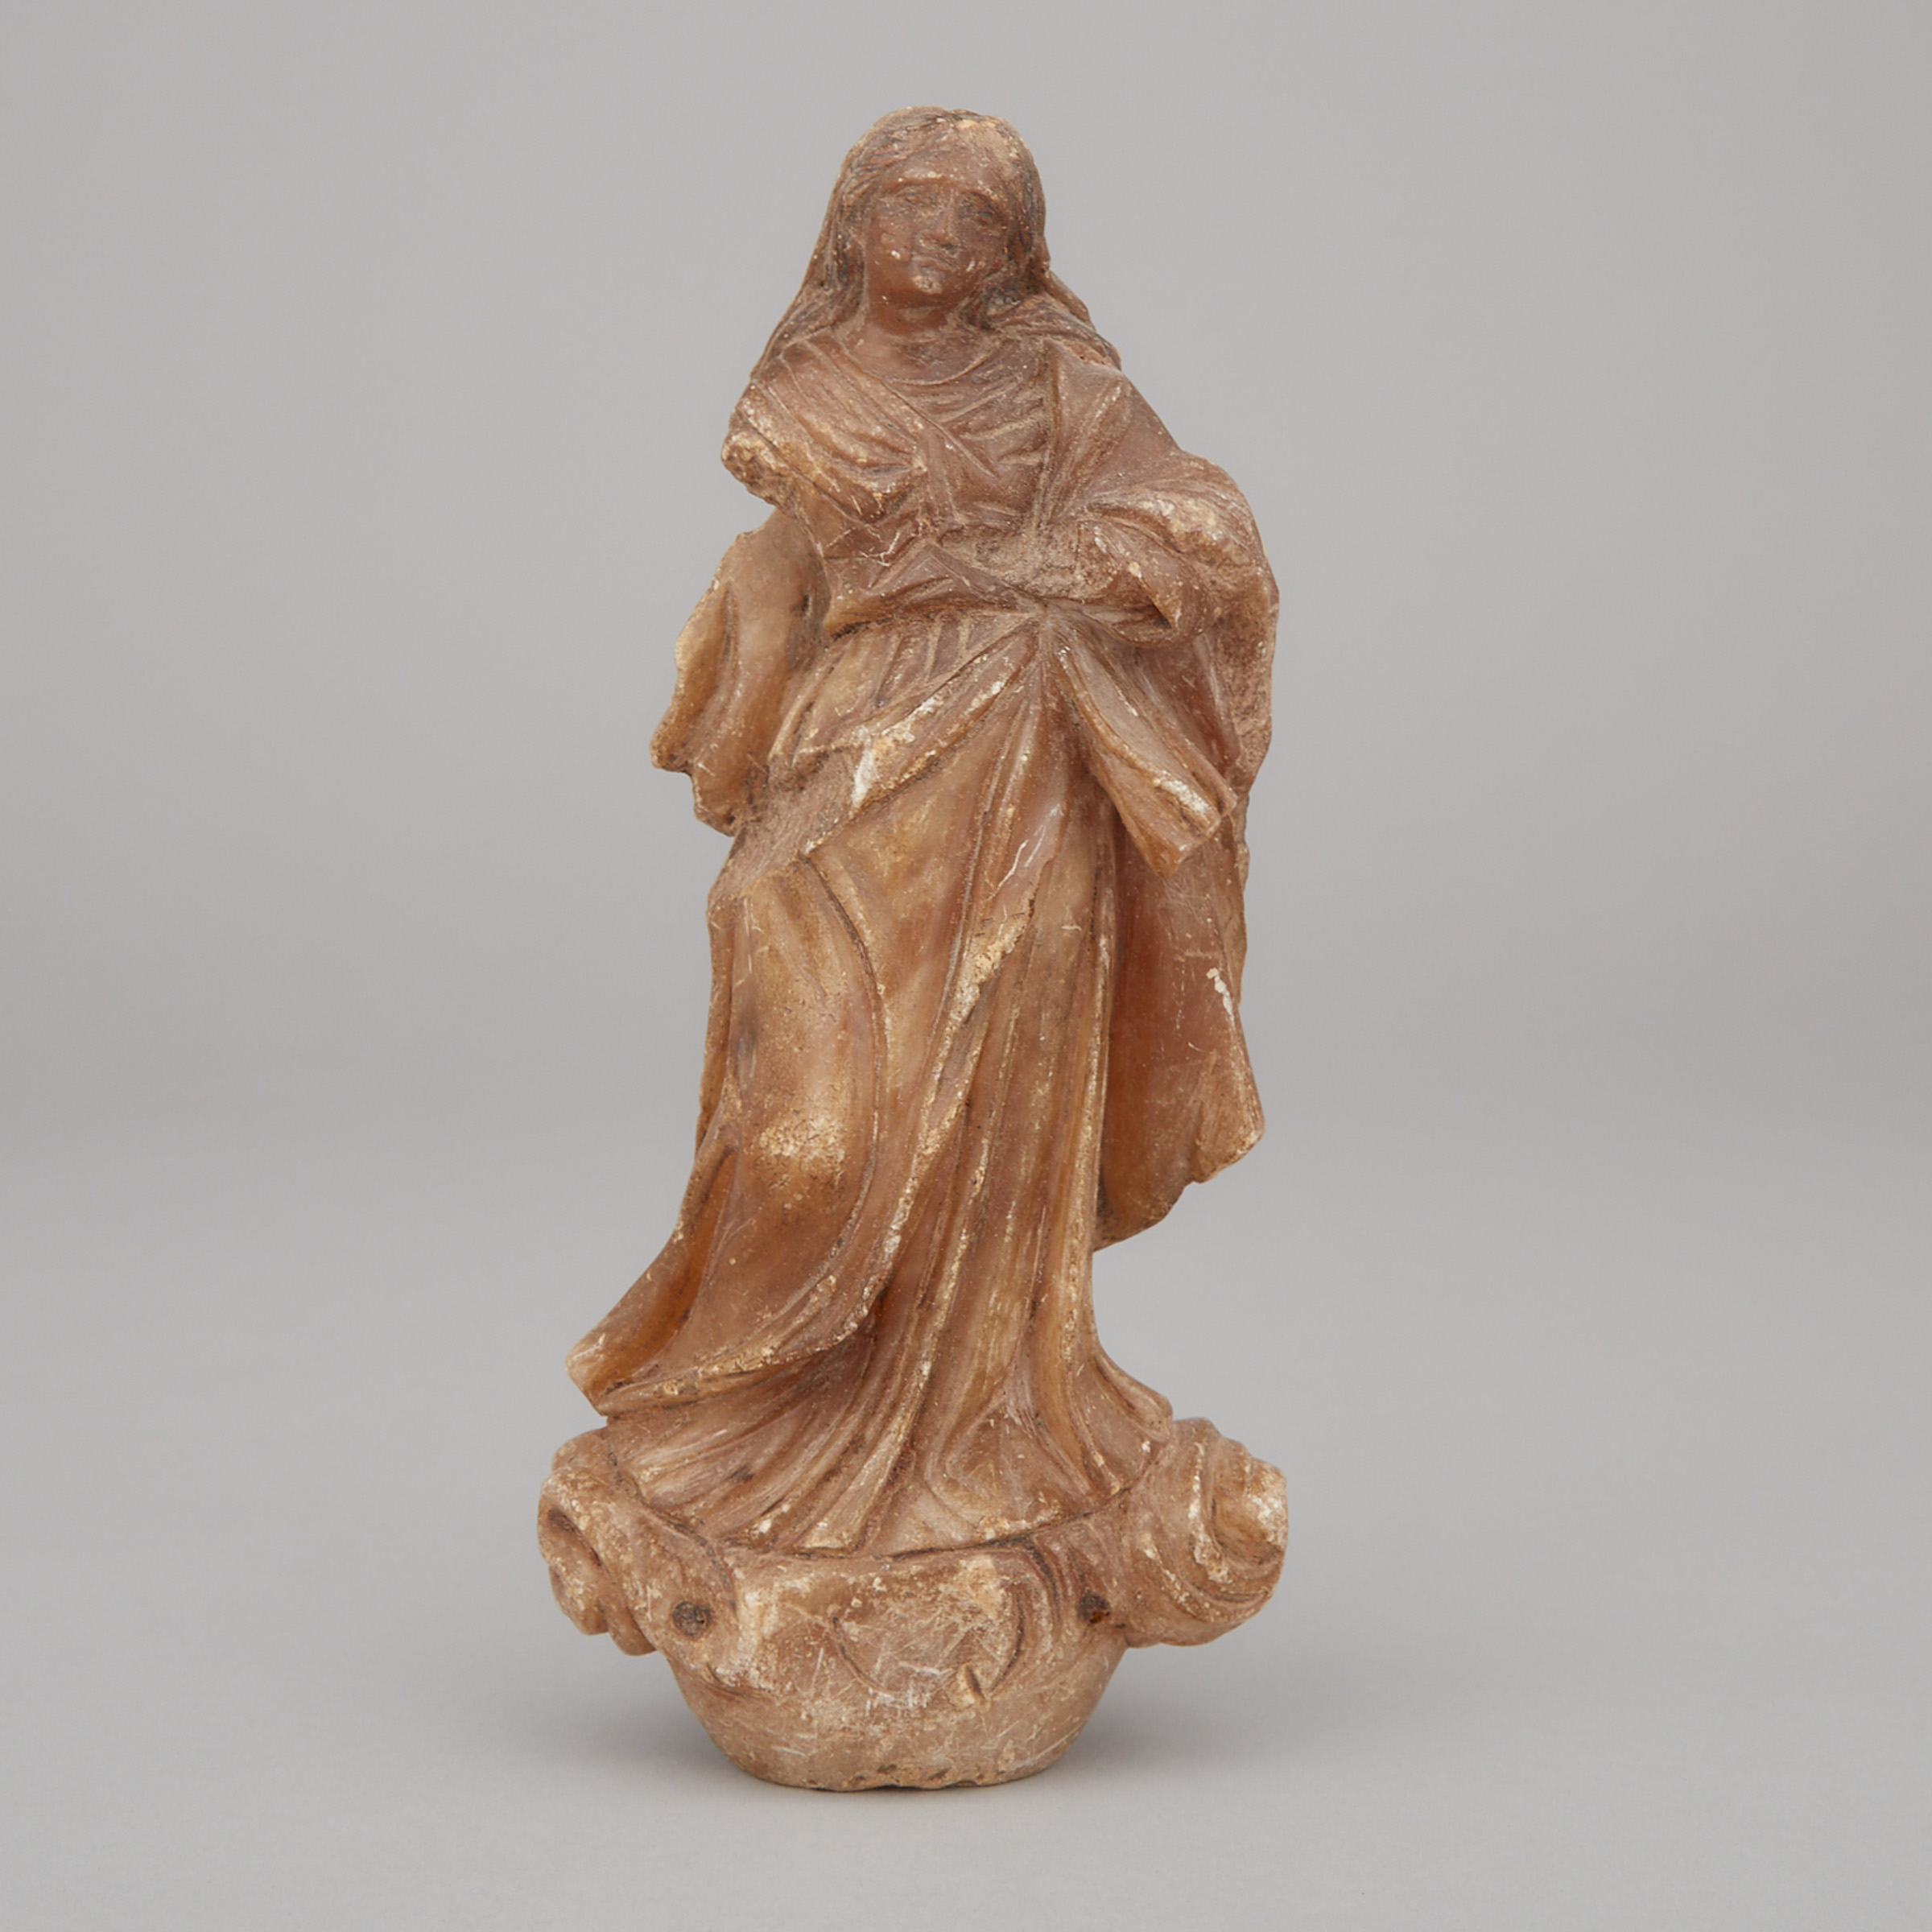 North Spanish Alabaster Figure of the Virgin, 17th century or earlier